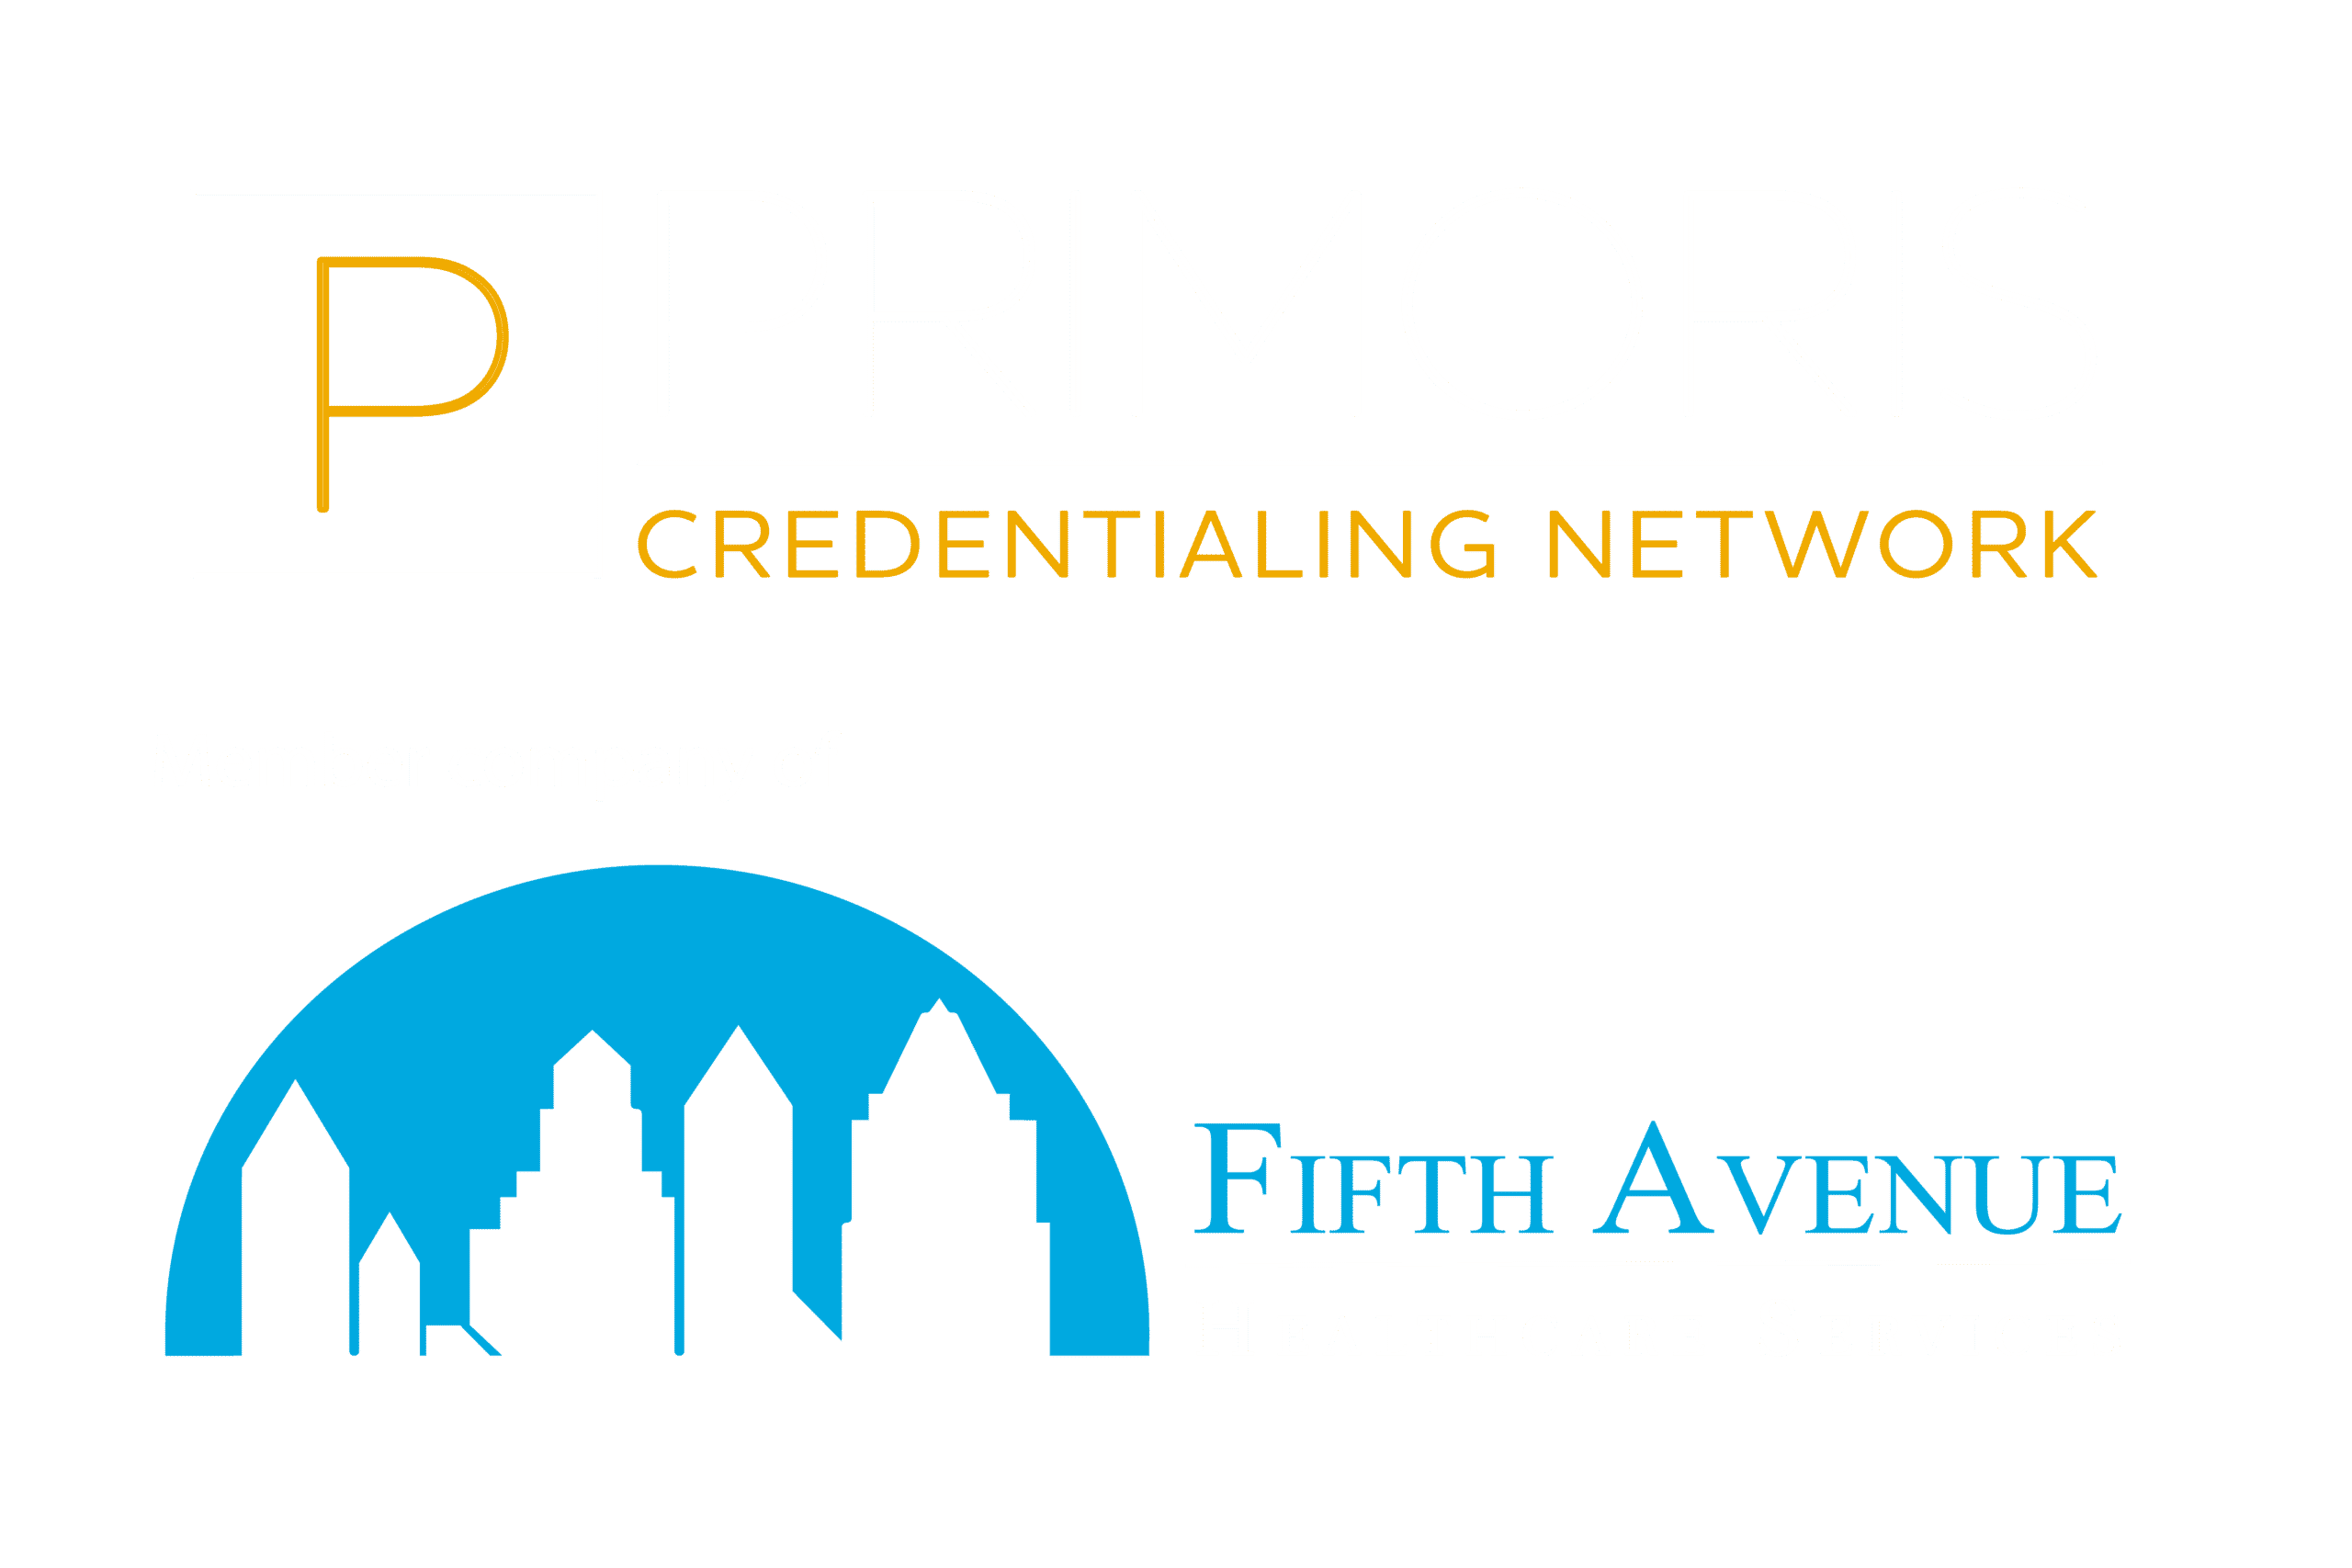 Primoris Is A Member Company Of Fifth Avenue Healthcare Services